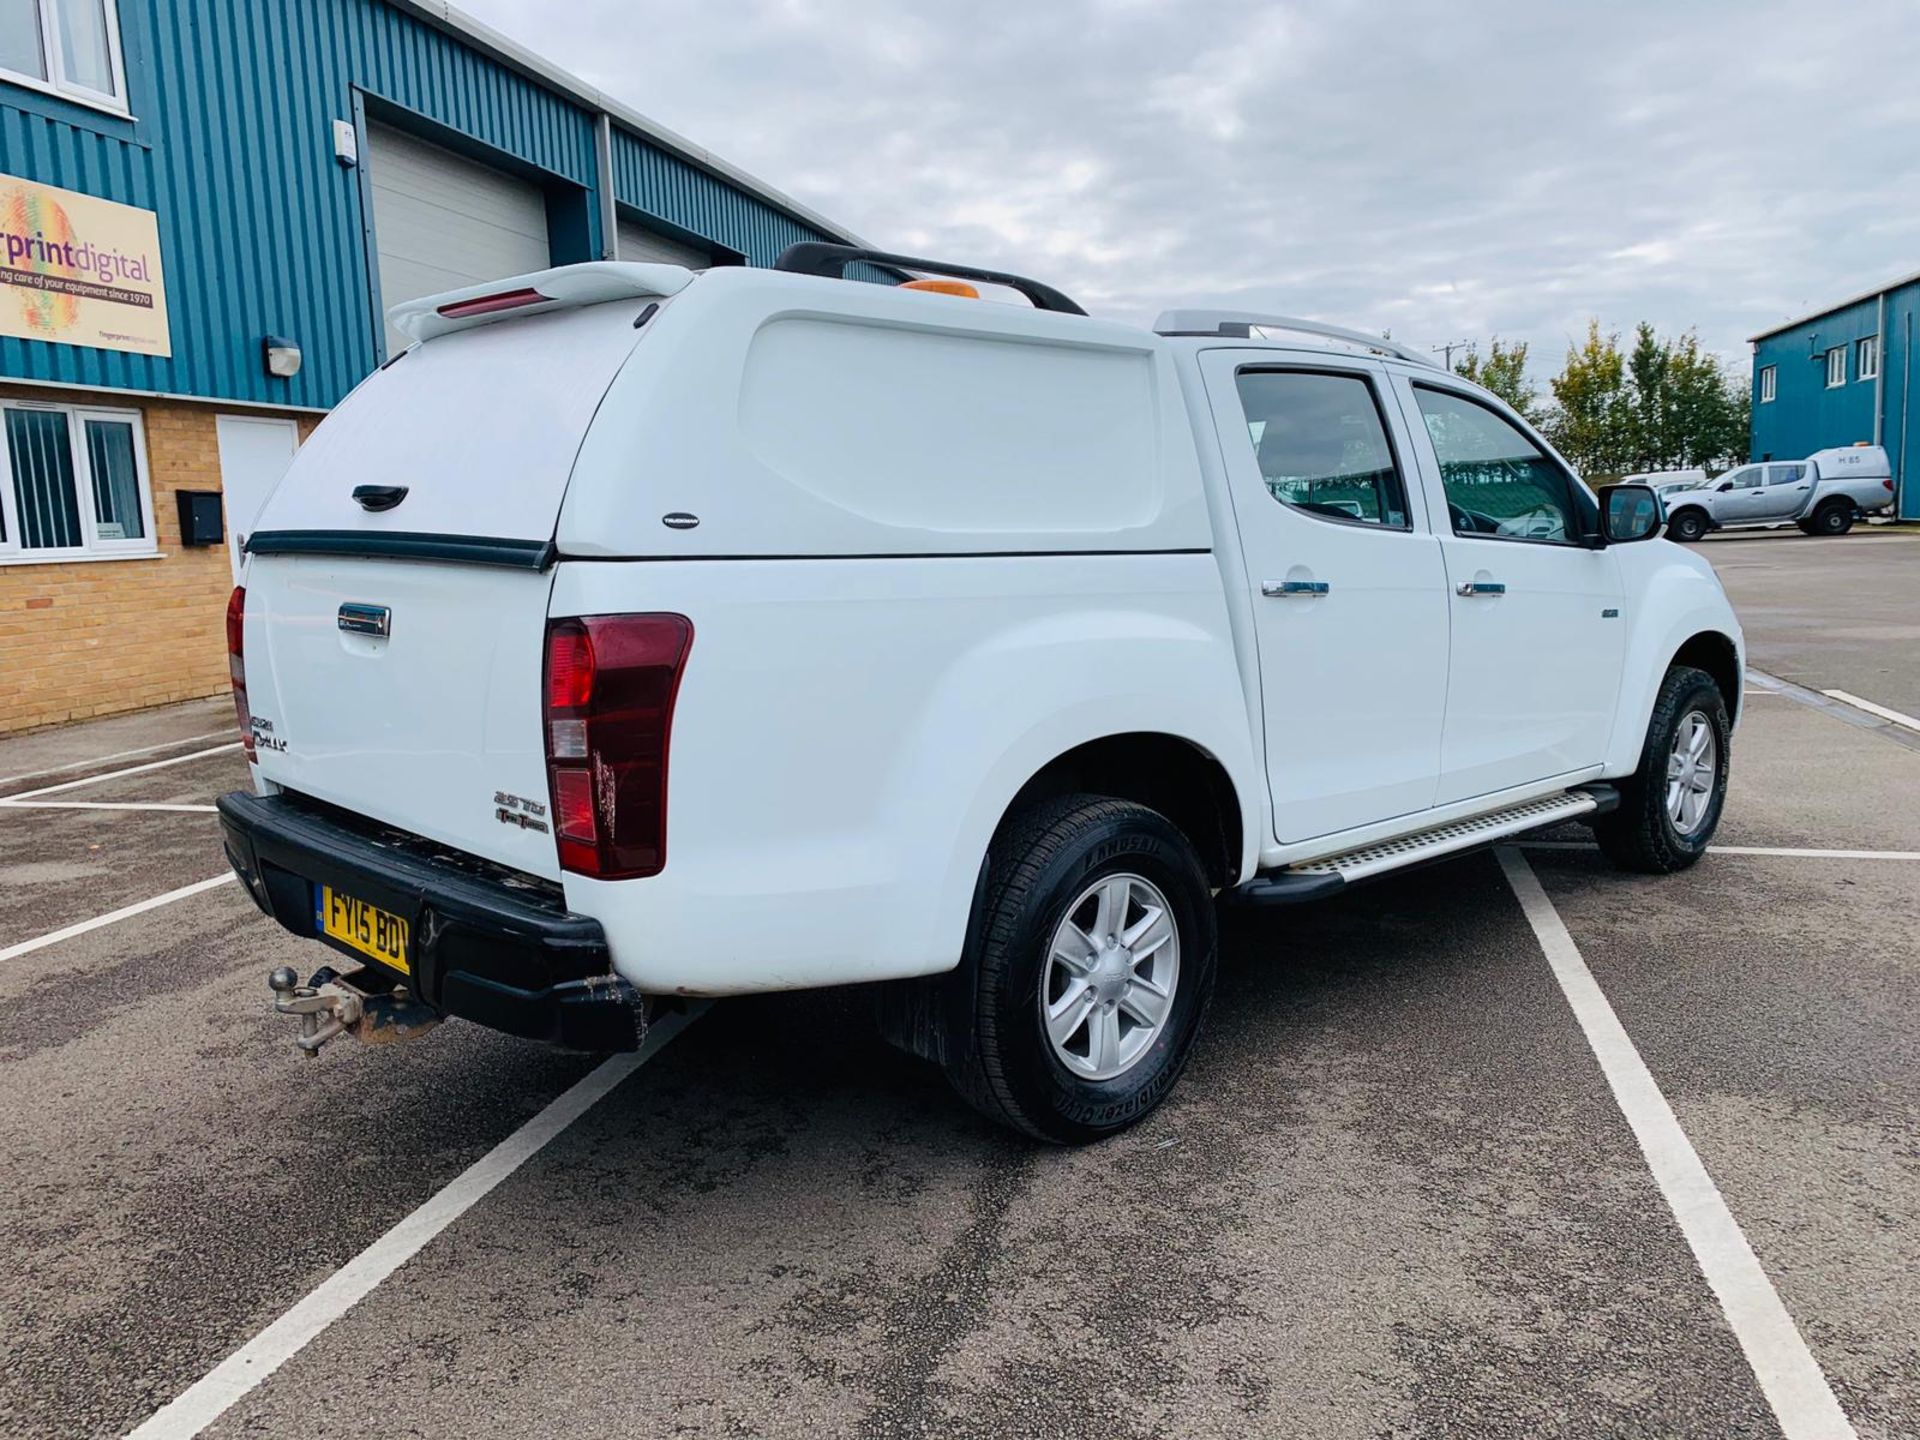 Isuzu D-Max Eiger 2.5 TD Double Cab Pick Up - 2015 15 Reg - Air Con - Tow Pack - 4X4 - Image 6 of 24